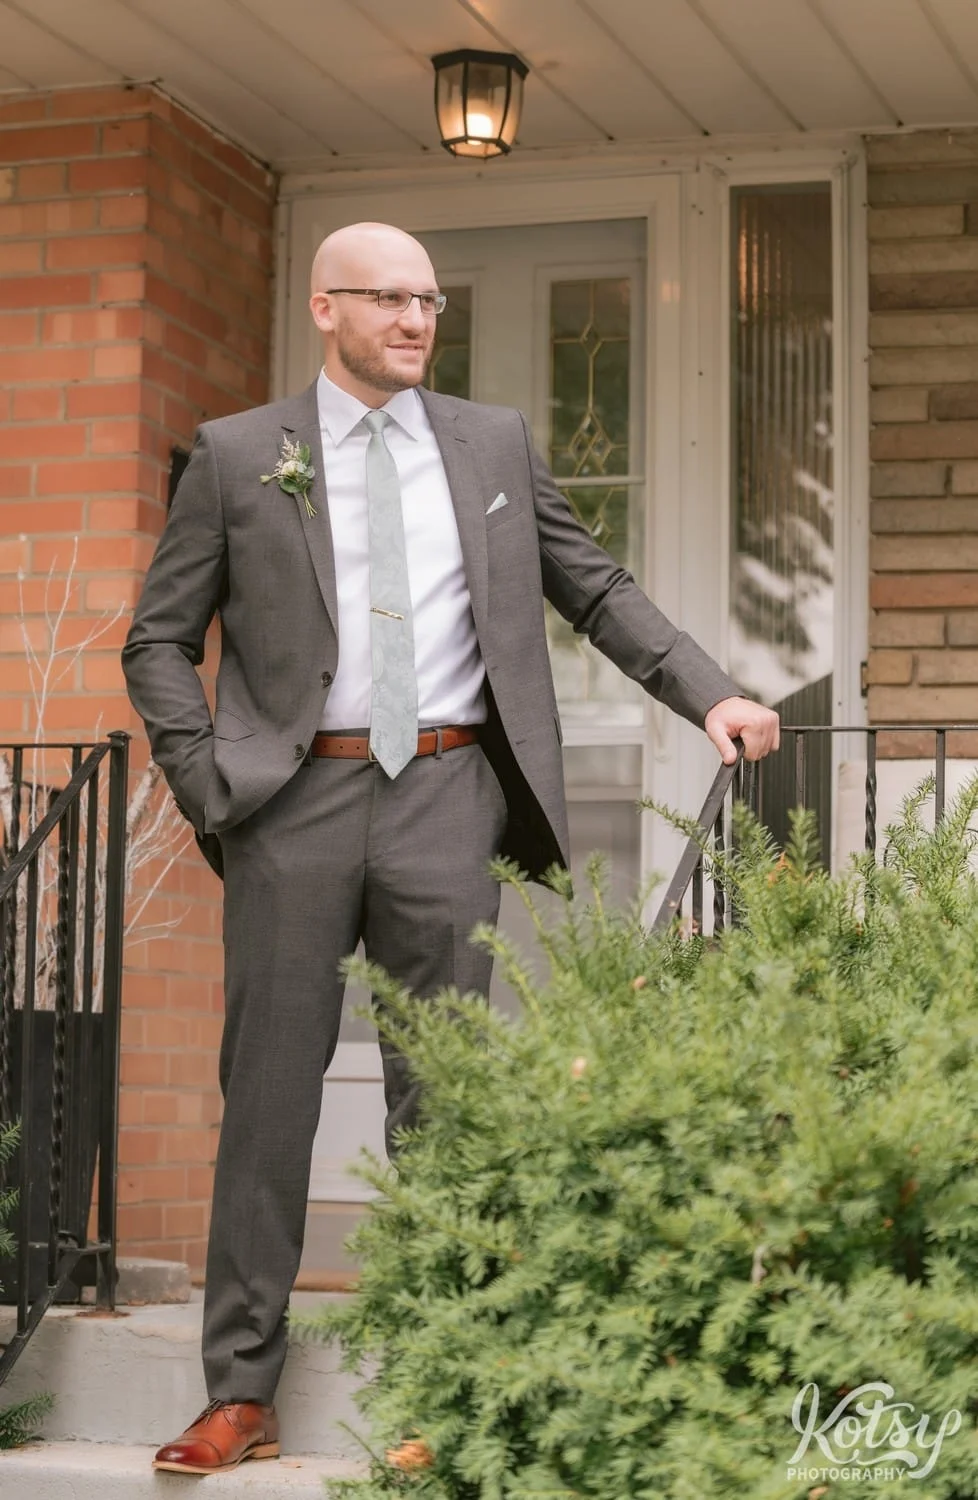 A groom standing on the front stairs to his house wearing a gray suit and green tie and his hand on the railing looking off camera